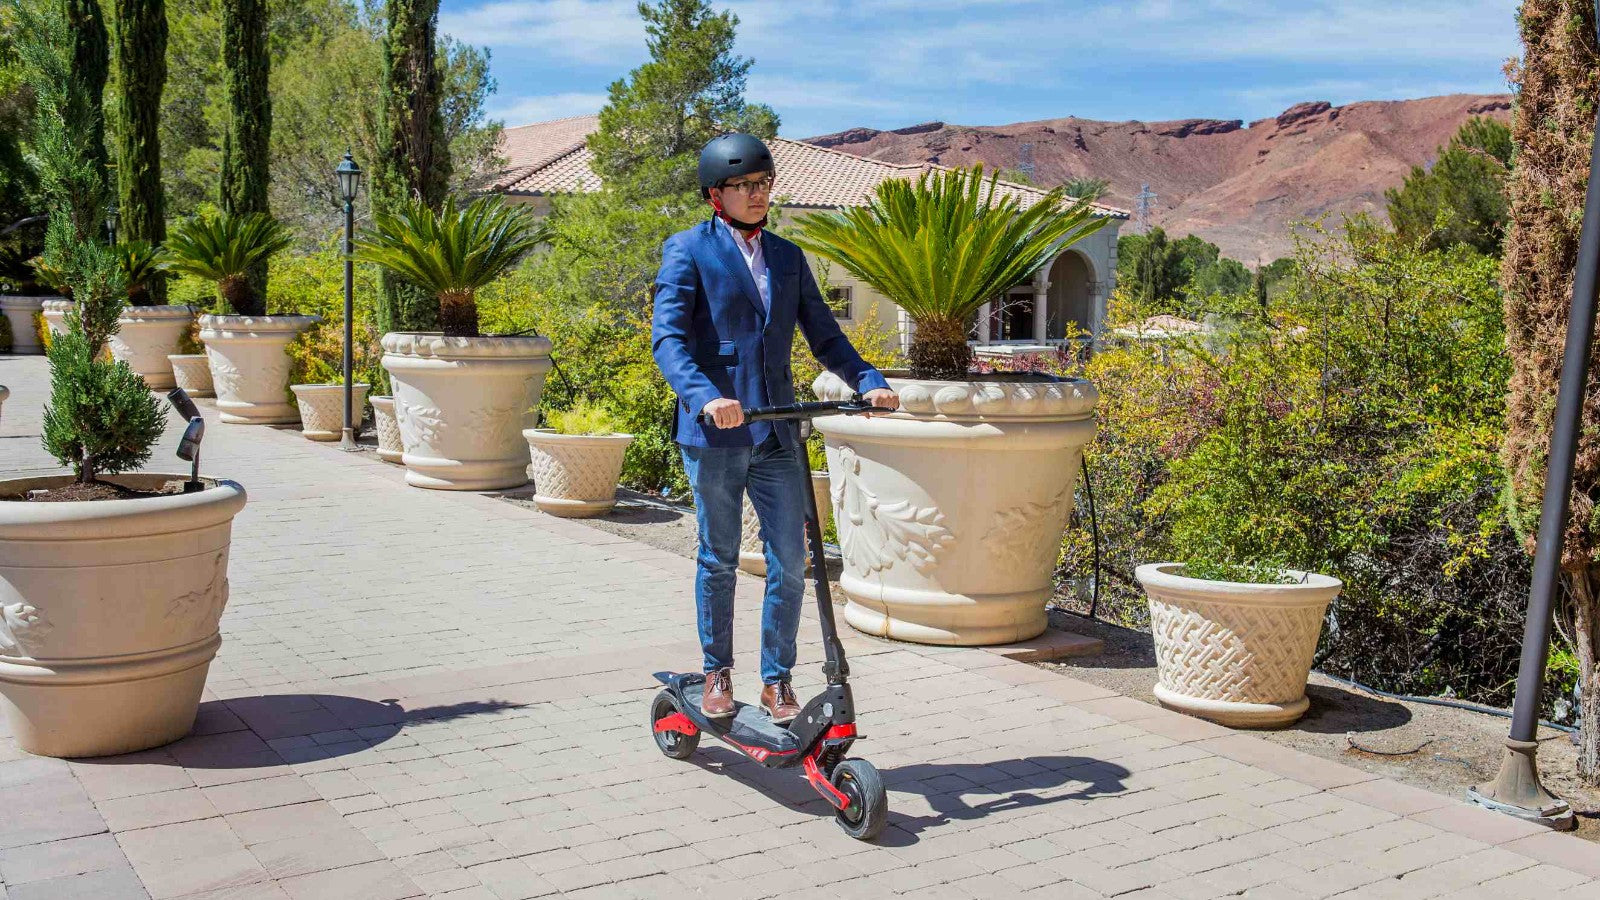 Hoverboard, Skateboard, or Electric Scooter: Which Is the Best Last-Mile Commuter?